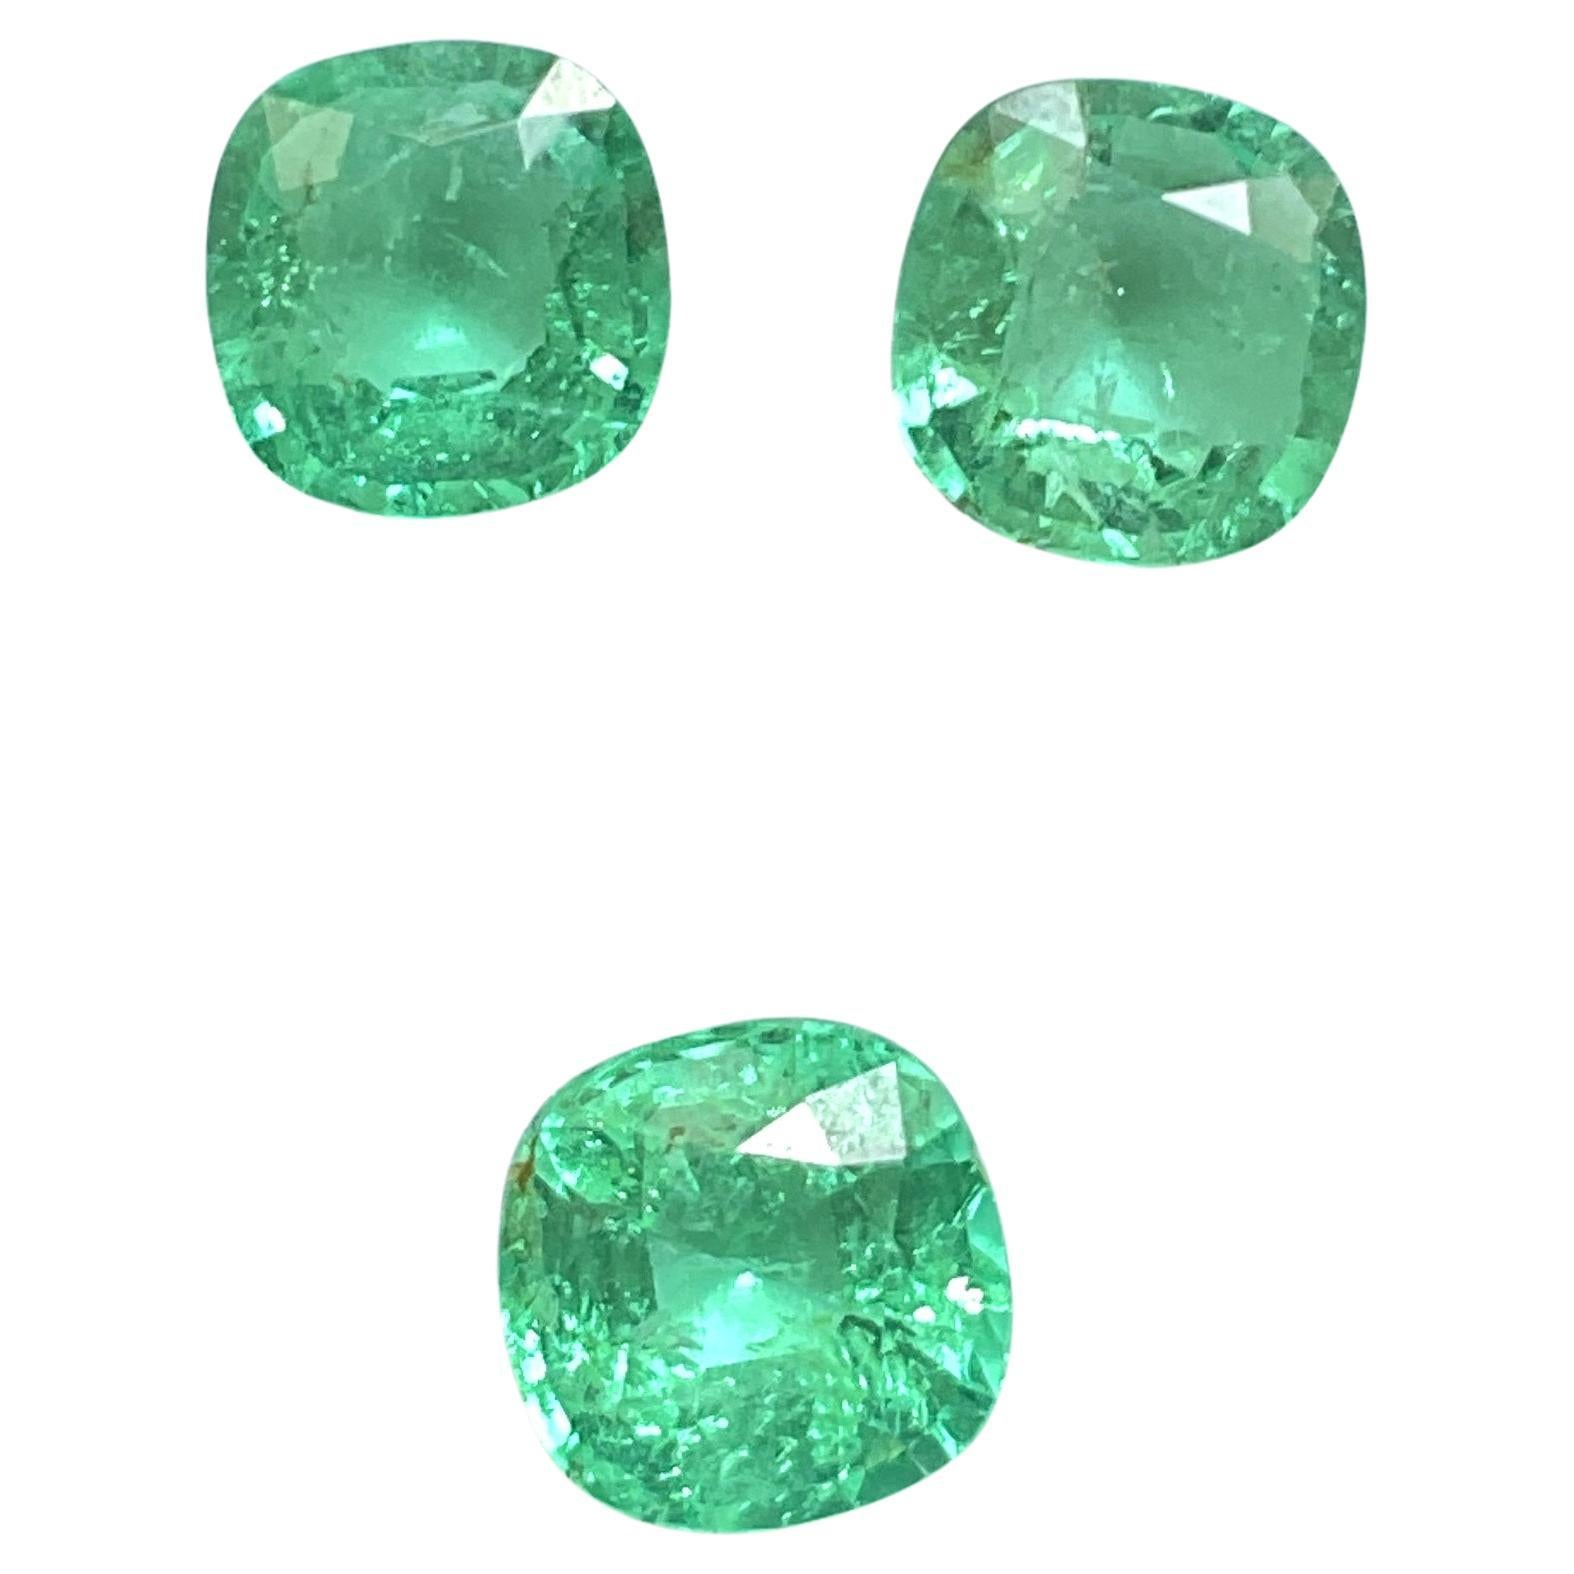 certified 10.35 carats colombian emerald cushion 3 pieces cut stone set gemstone